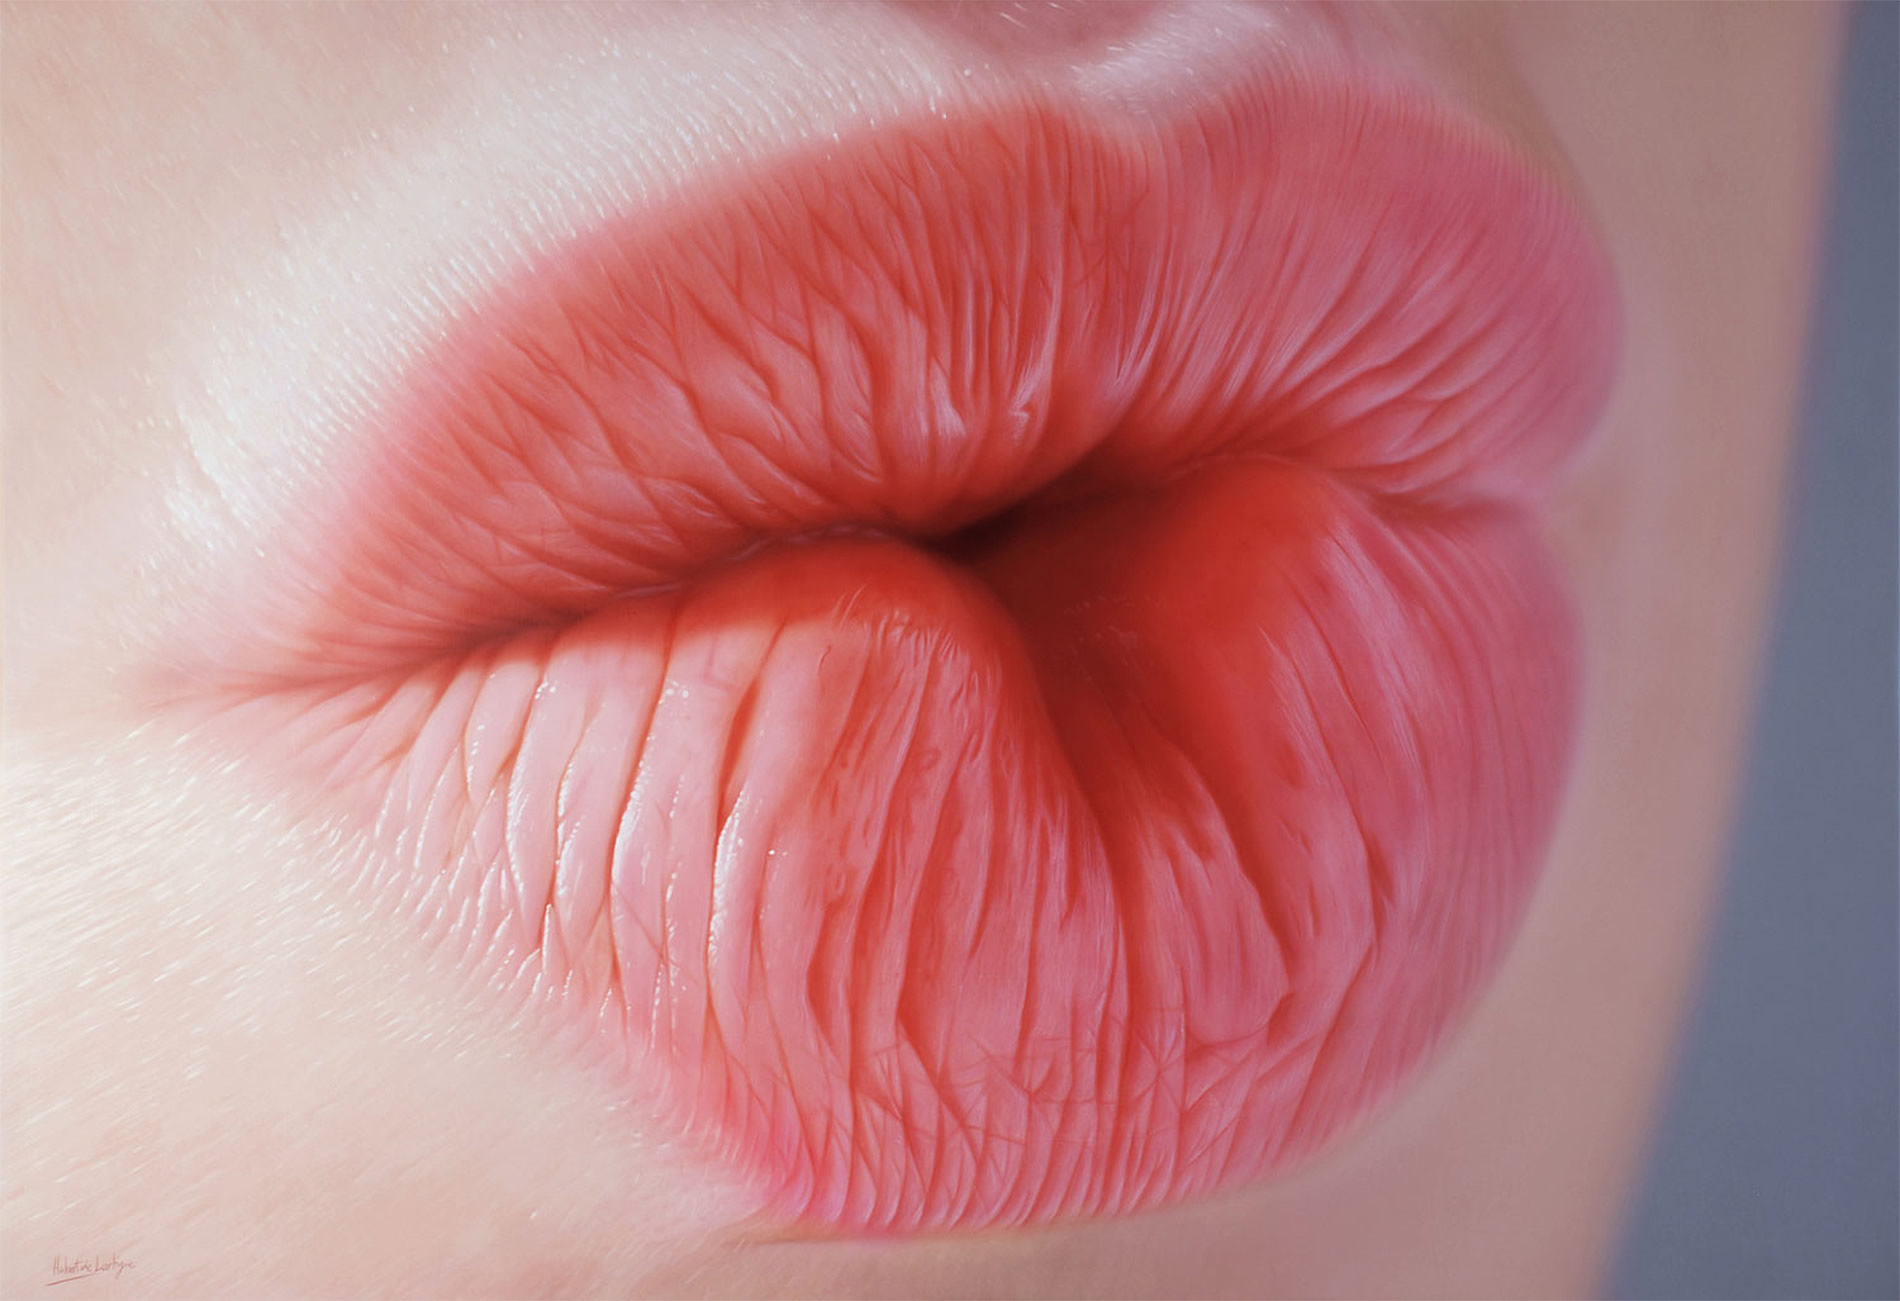 plump pink lips, painting by plump pink lips, painting by Hubert de Lartigue